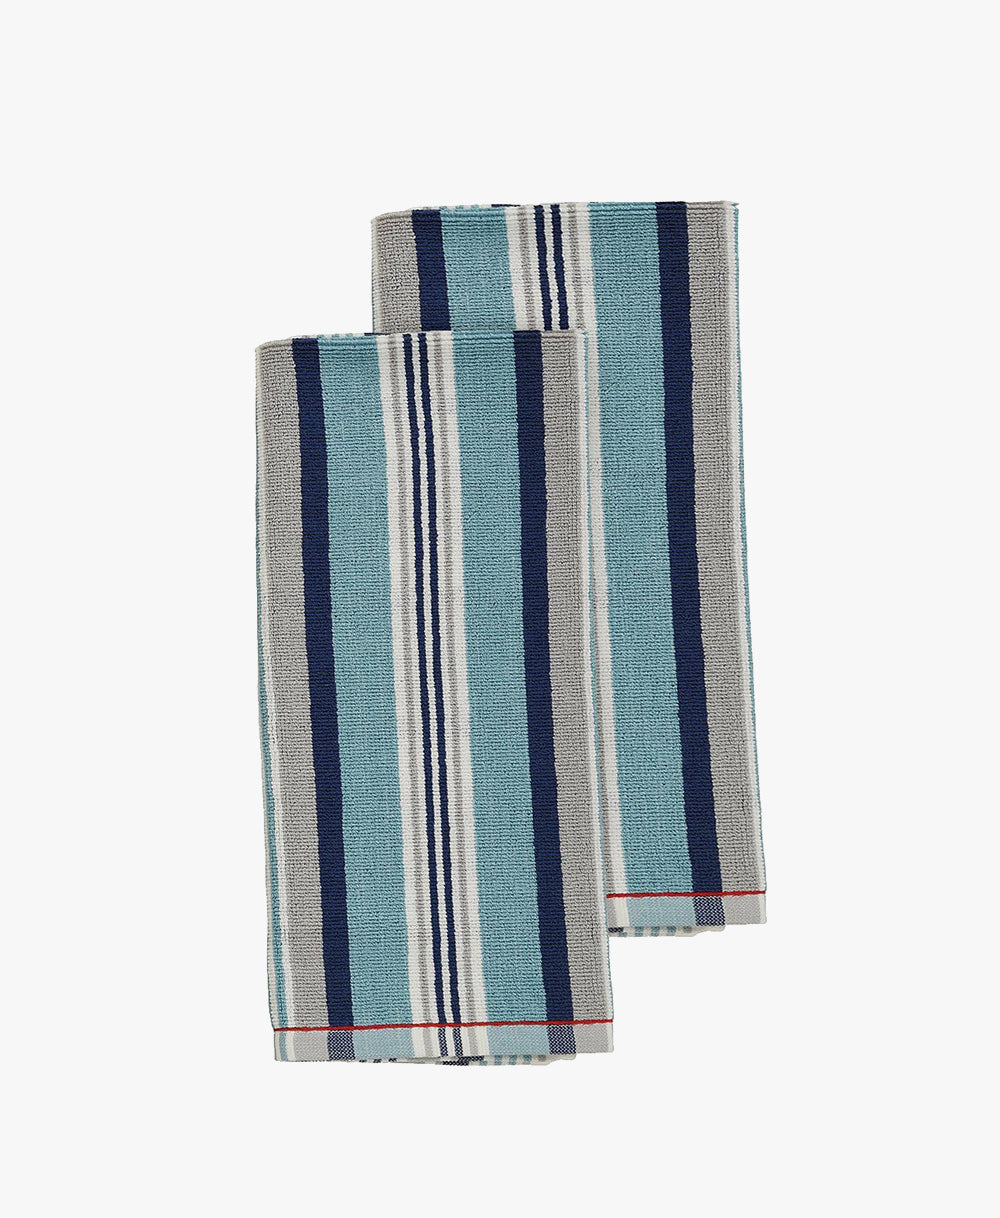 All-Clad Dish Towels Dual Purpose Reversible, 100% Absorbent Cotton,  Kitchen Towels Set of 3 Striped, 17 x 30, 3-Pack Indigo Textiles